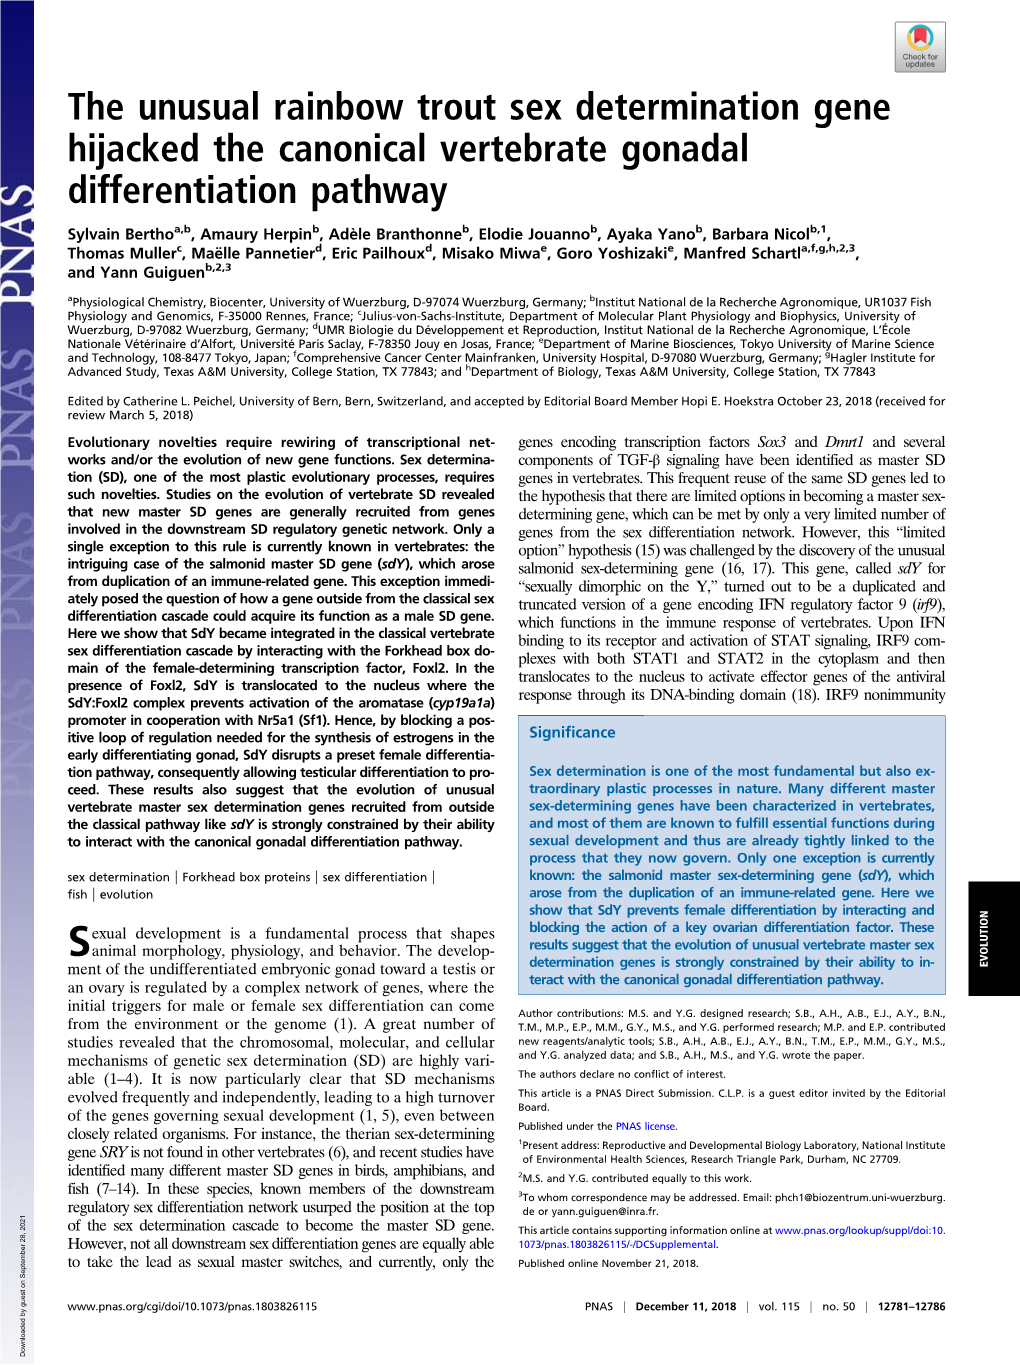 The Unusual Rainbow Trout Sex Determination Gene Hijacked the Canonical Vertebrate Gonadal Differentiation Pathway